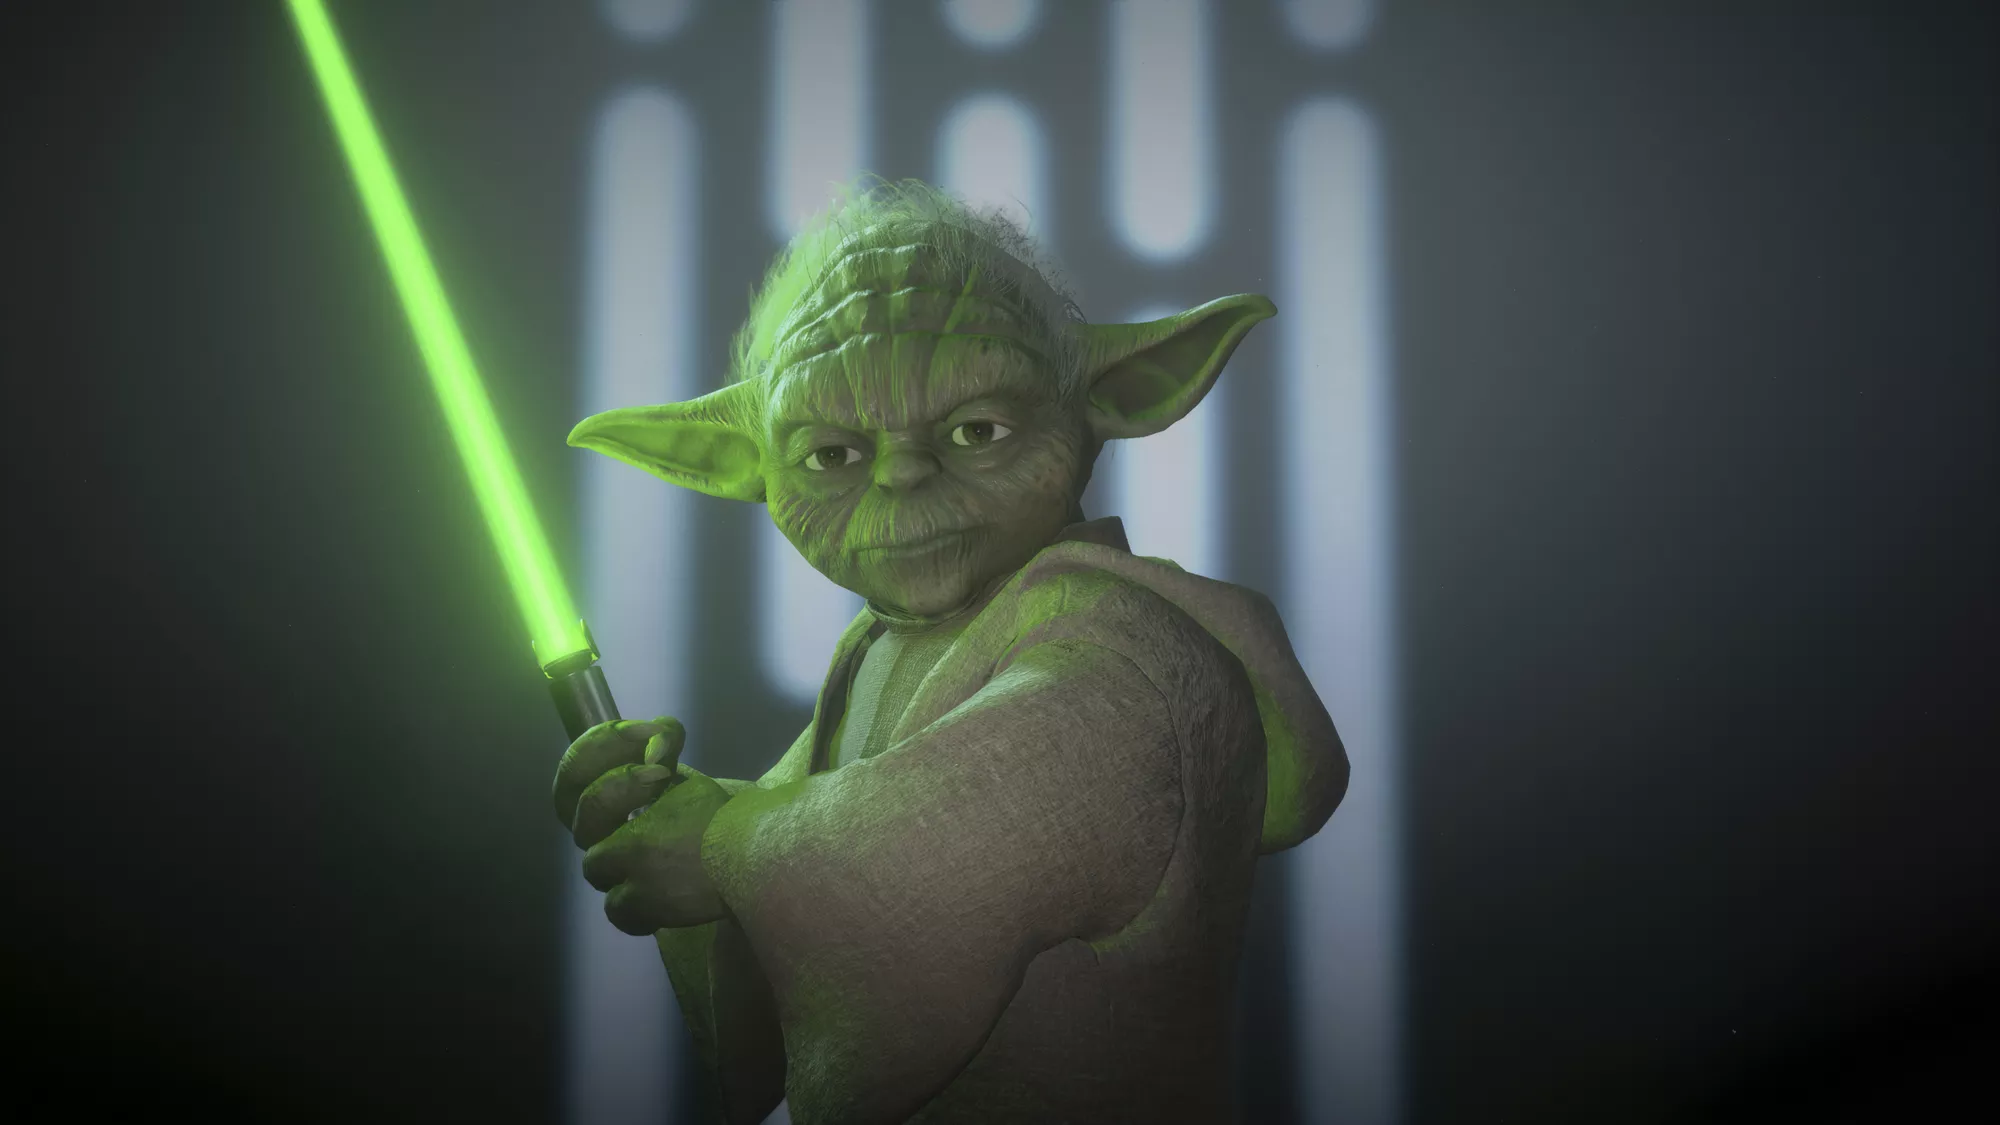 Yoda's teachings and what you can learn from his wisdom